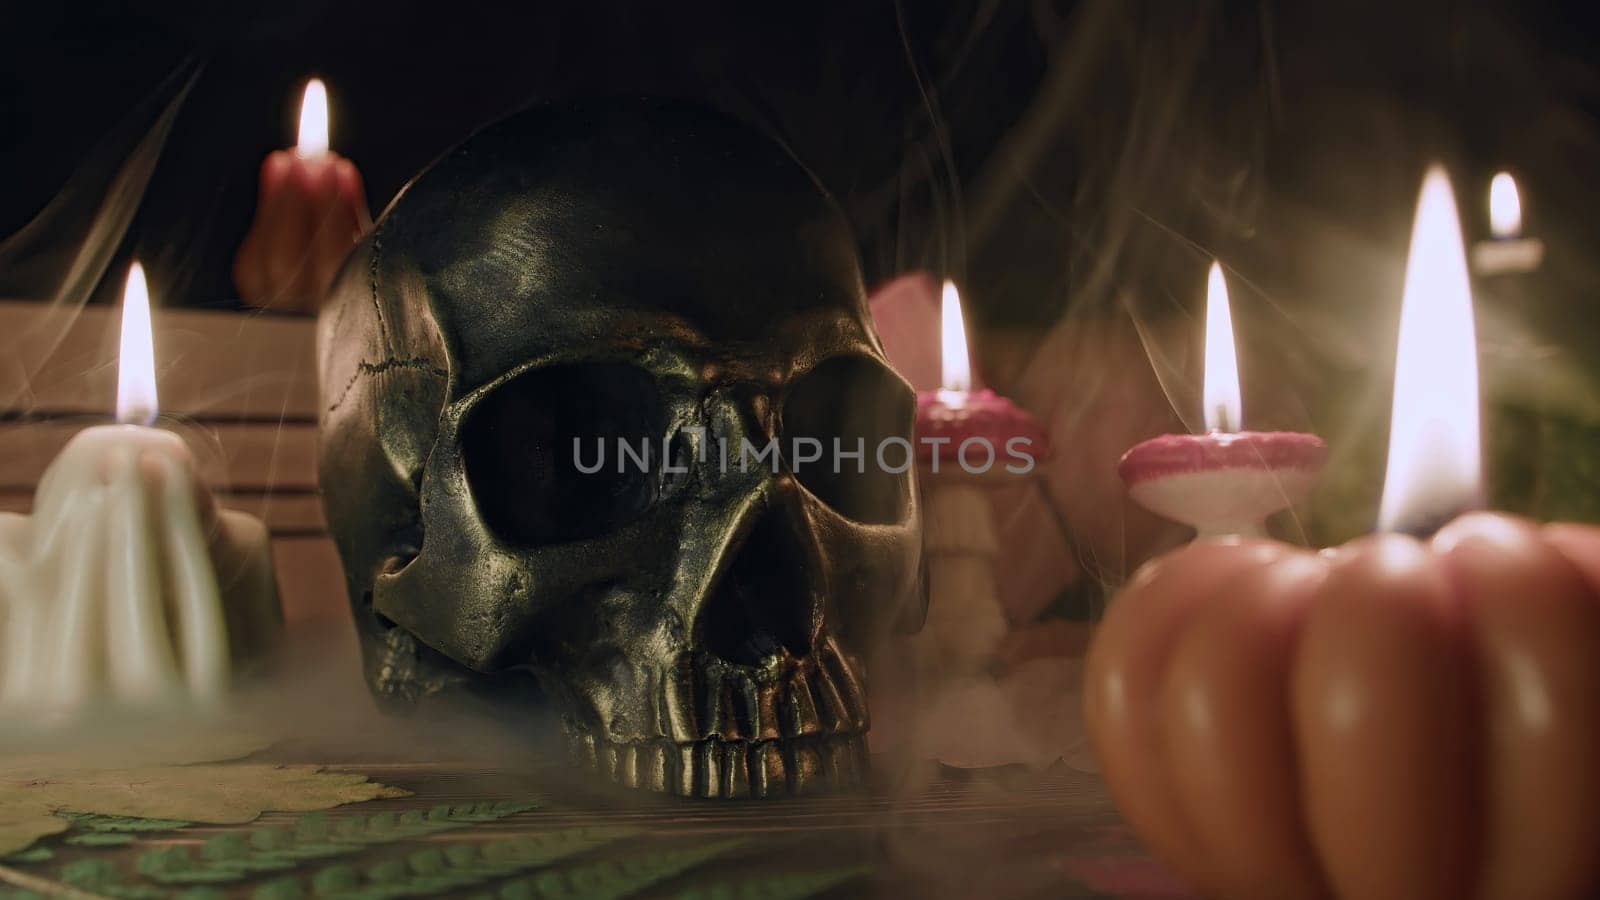 Mystique background - bronze human skull with candles. Visual gothic aesthetic. Autumn pumpkin candle, falling leaves. Ambience of fall. Seasonal promotions or dramatic visual storytelling.